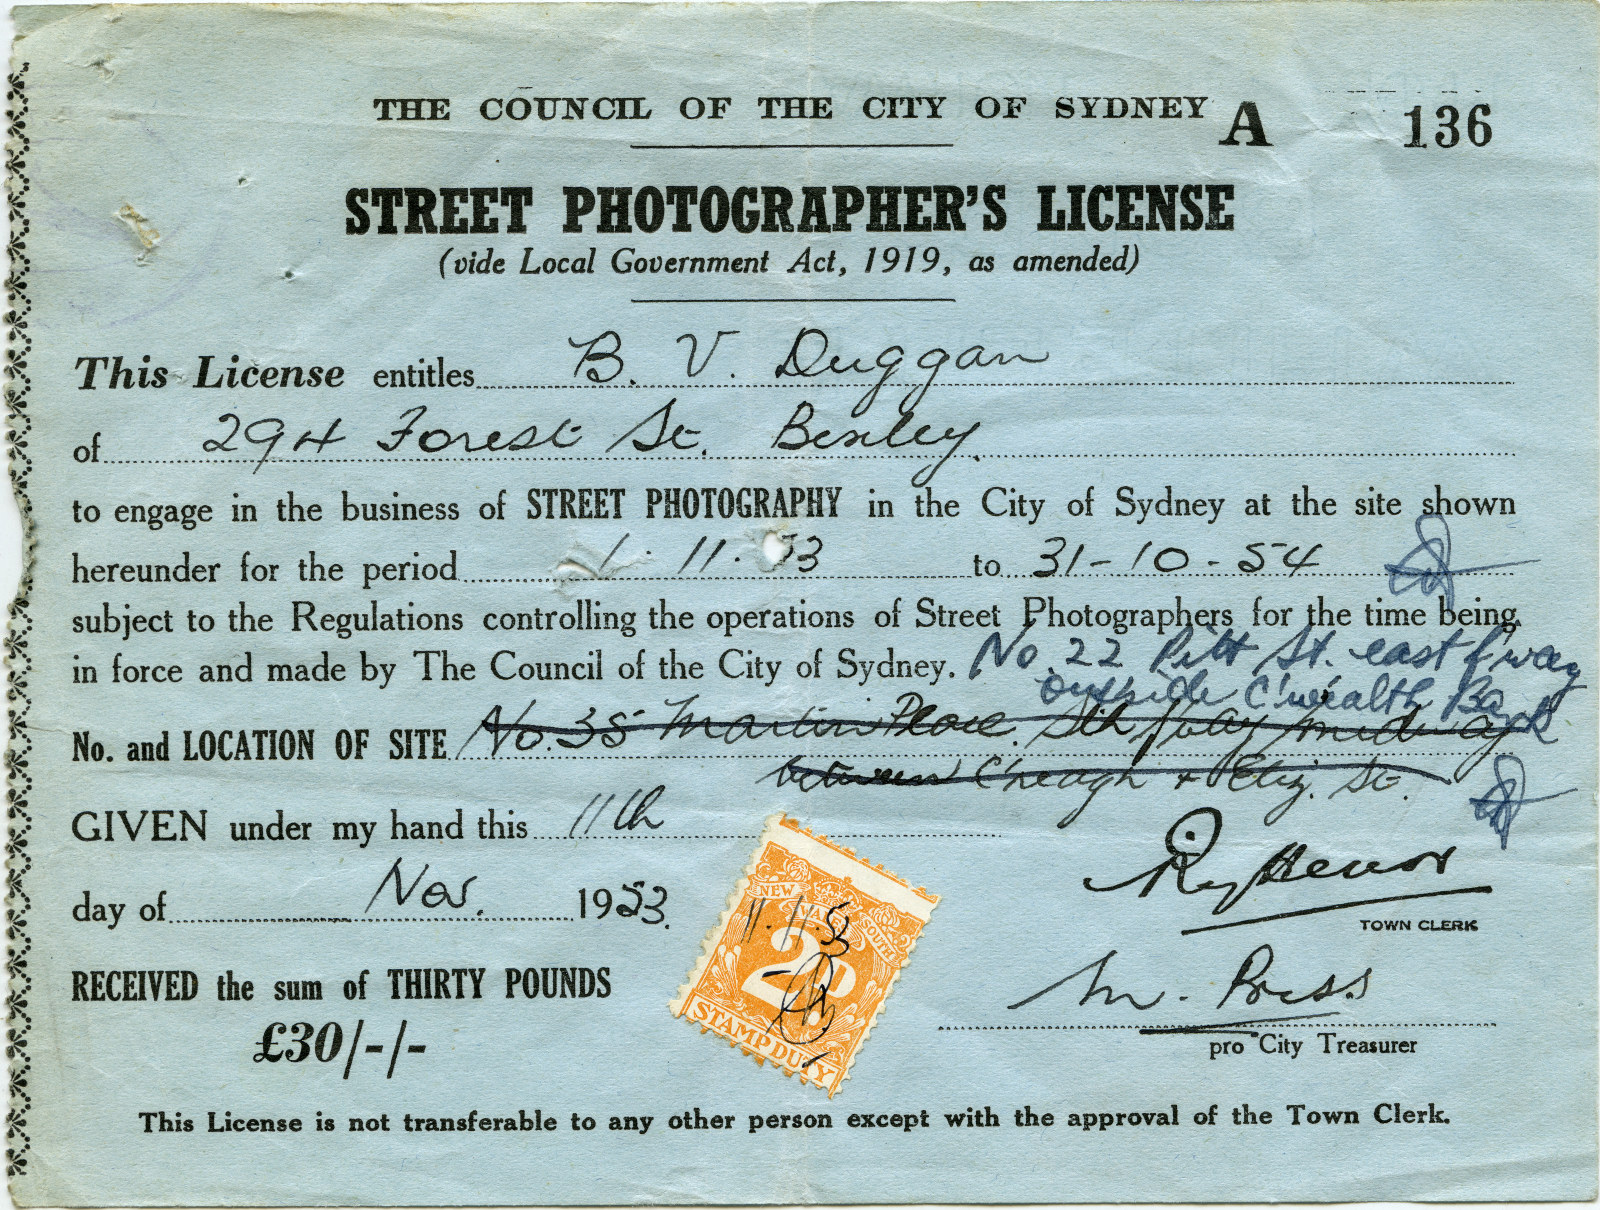 Street photographer's license issued to B.V. Duggan in 1953